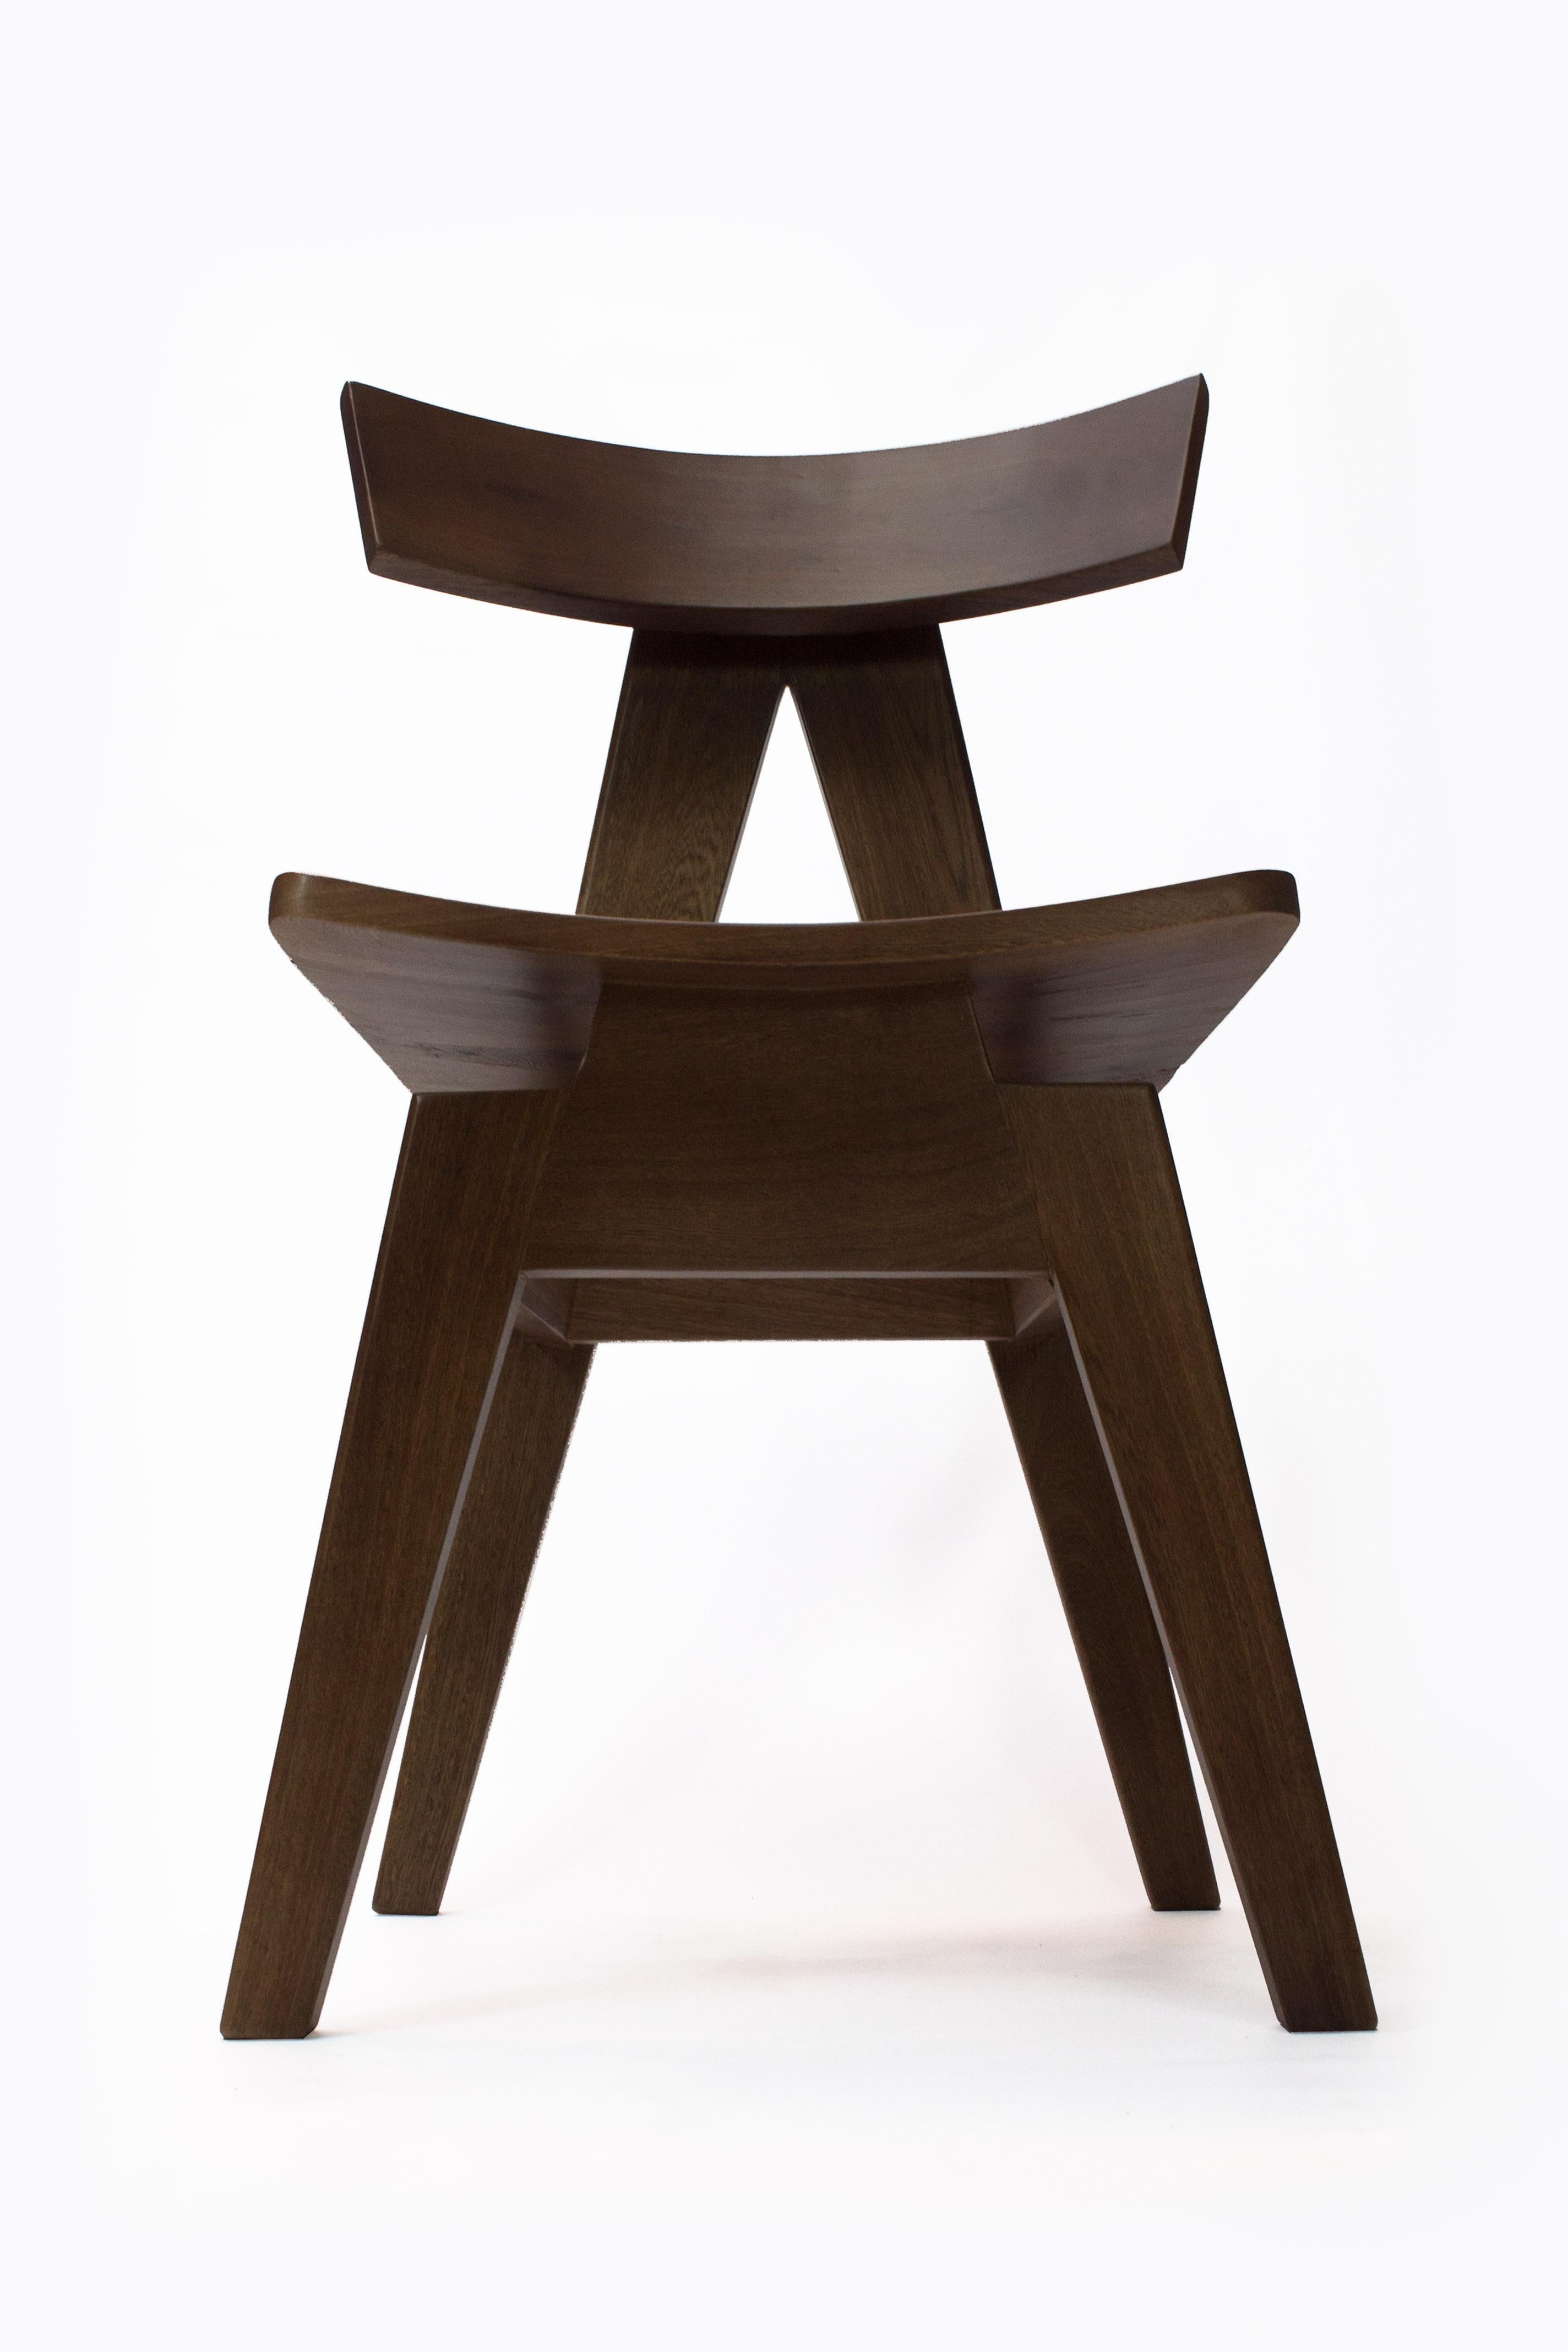 Marques Chair, by Camilo Andres Rodriguez Marquez 4